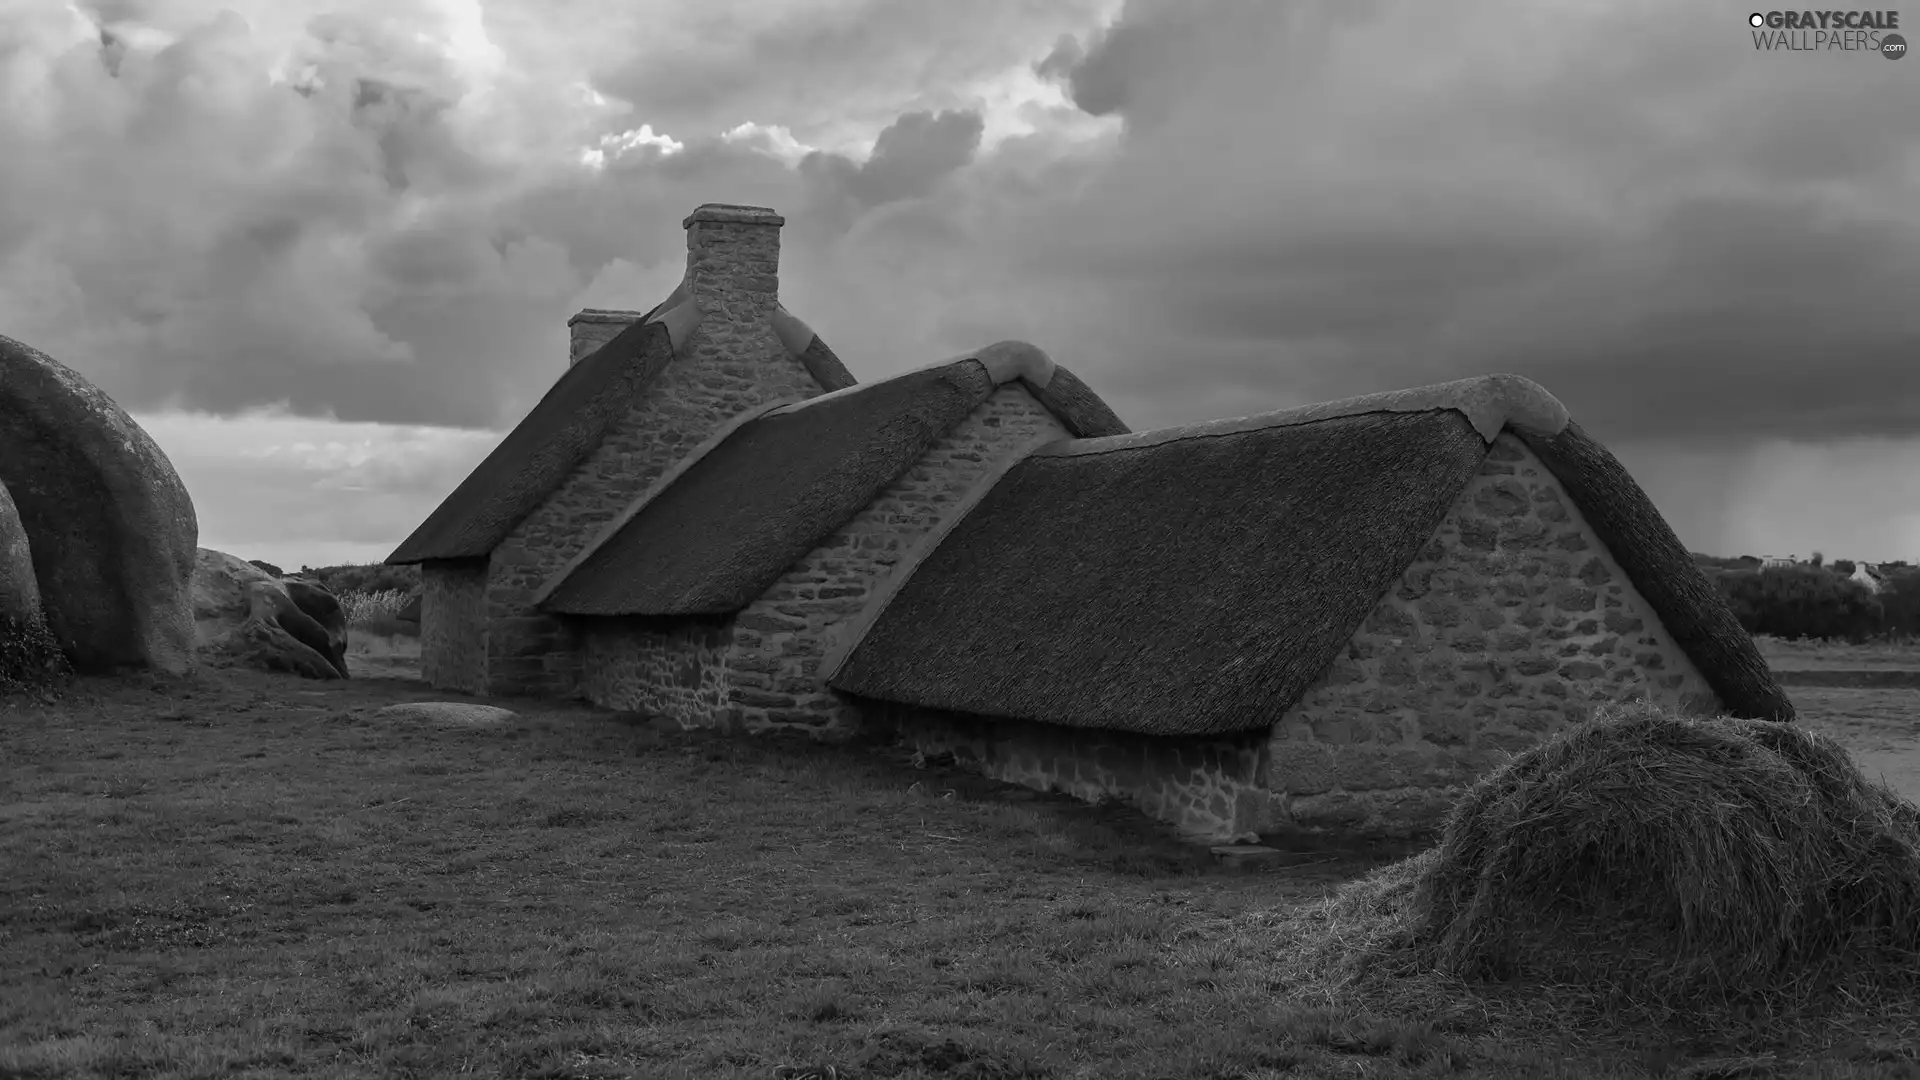 huts, country, Hay, grass, thatch, Rocks